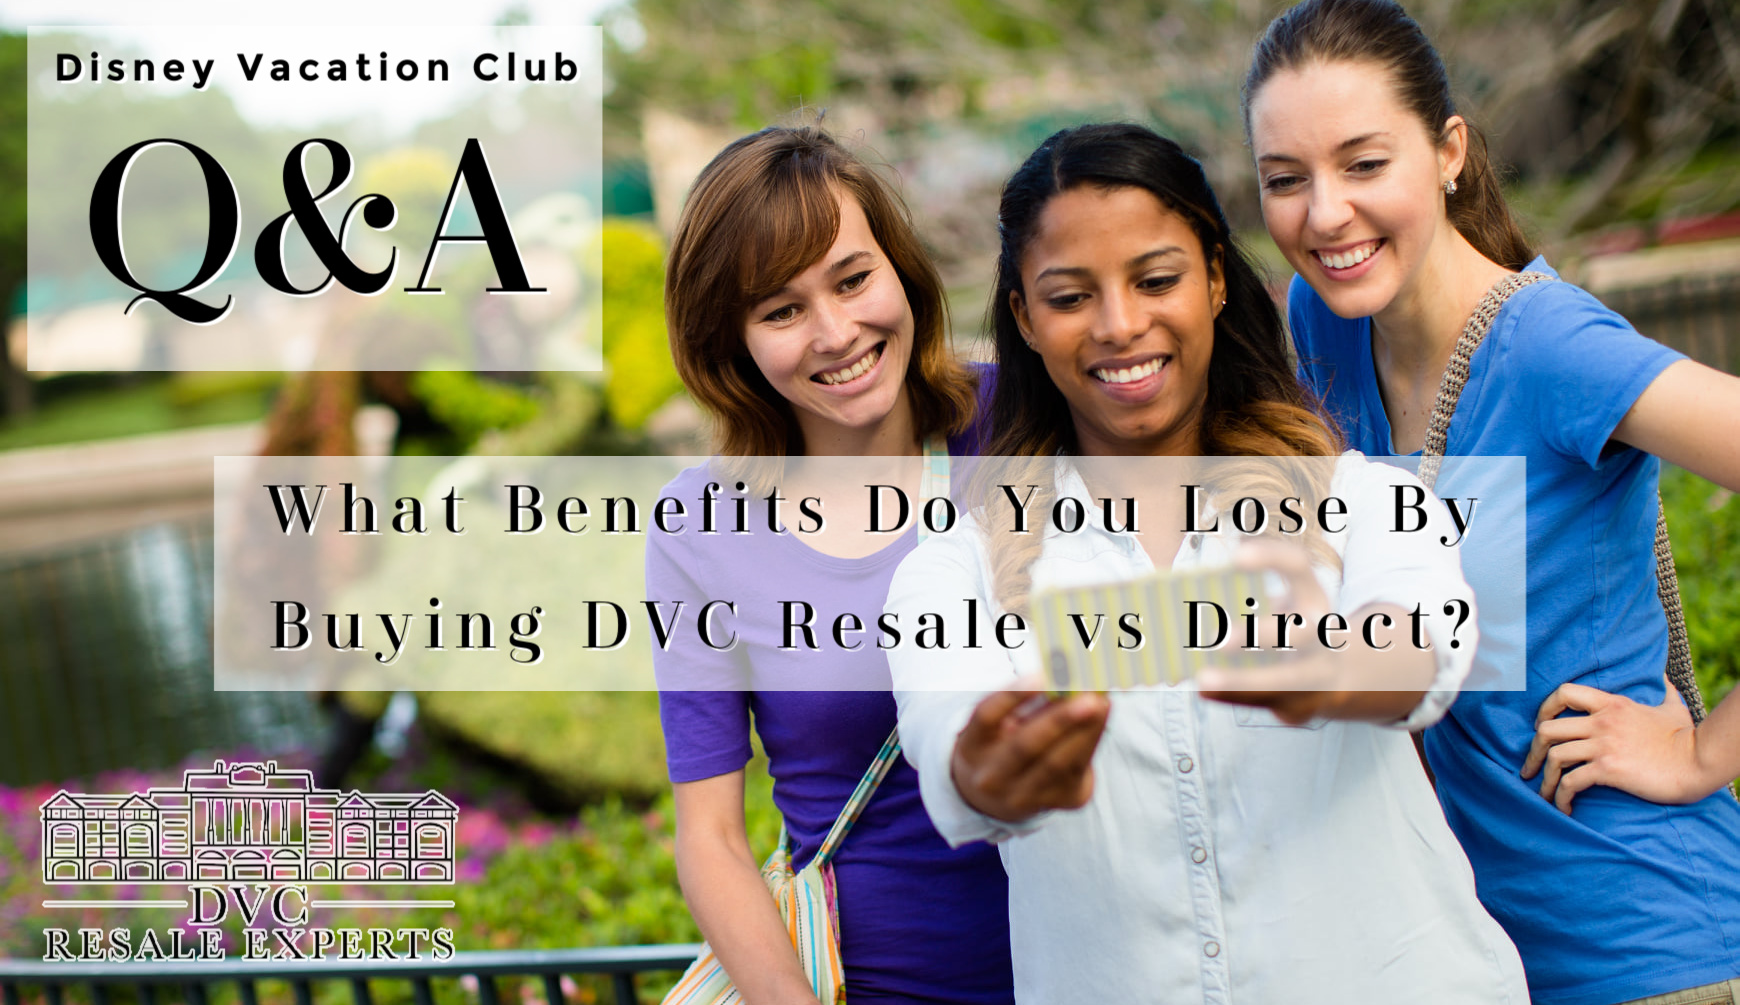 What Benefits Do You Lose By Buying DVC Resale vs Direct